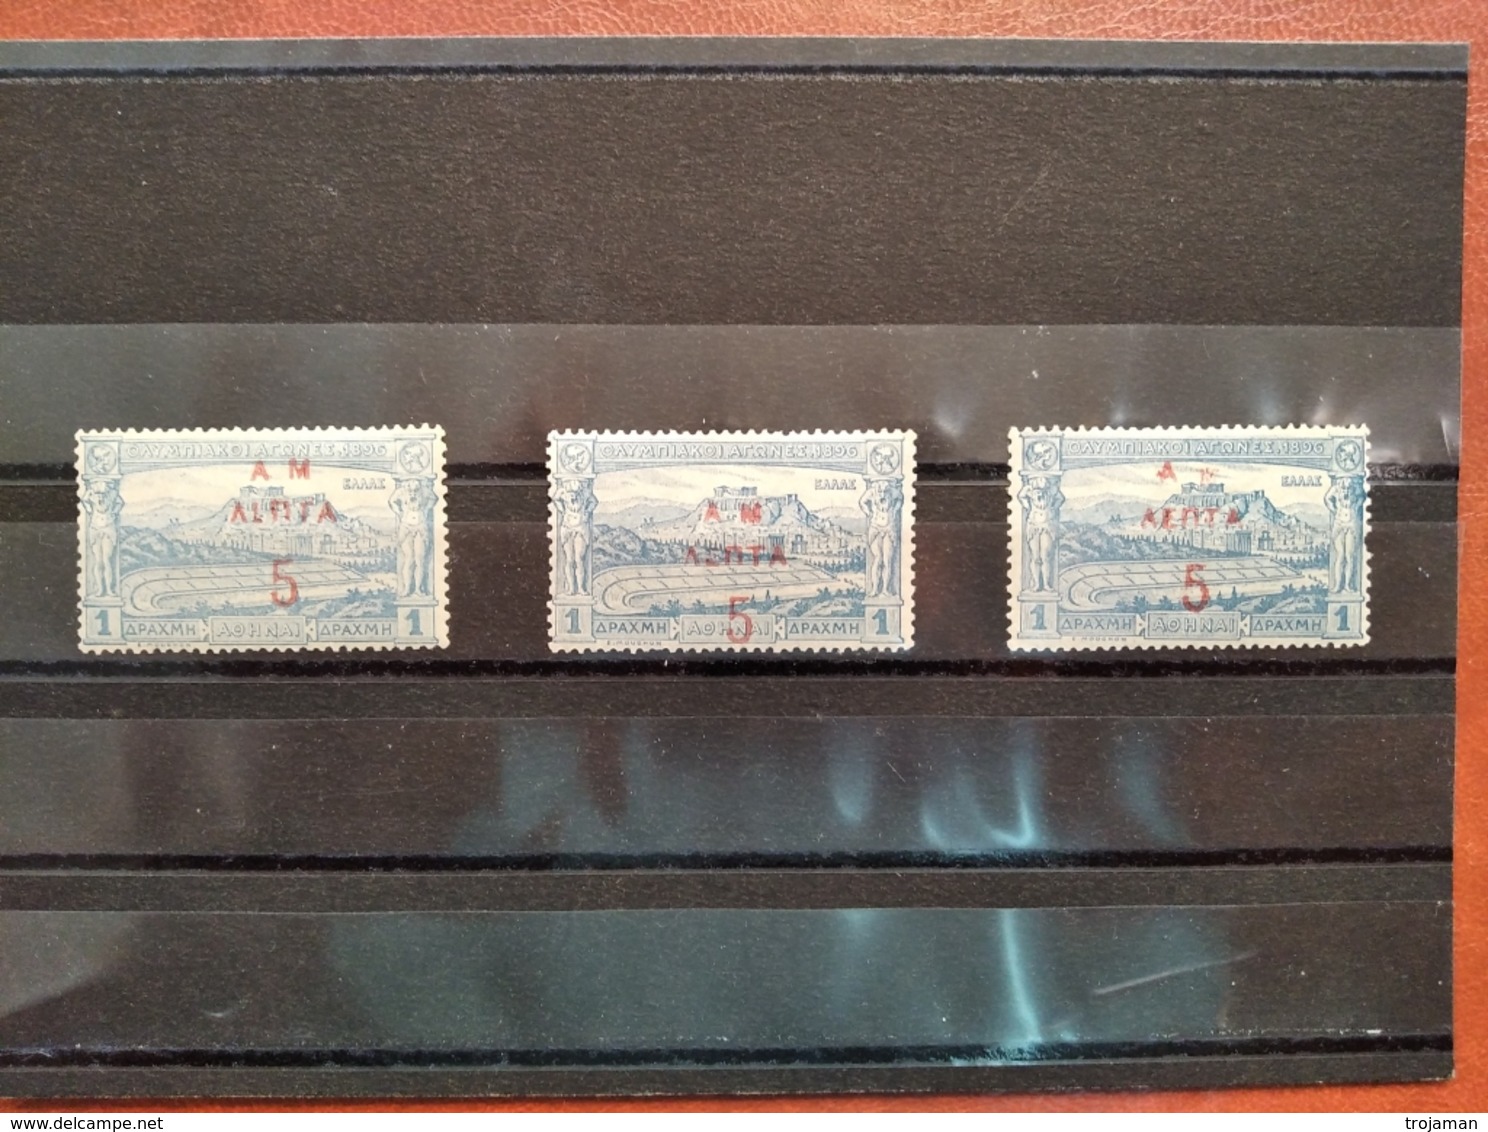 EX -03-20-14 3 STAMPS WITH THE DIFF PROBLEMS OF OVERPRINT.  MH *. CAT. HERMES MINIMUM 300 EURO. - Sommer 1896: Athen